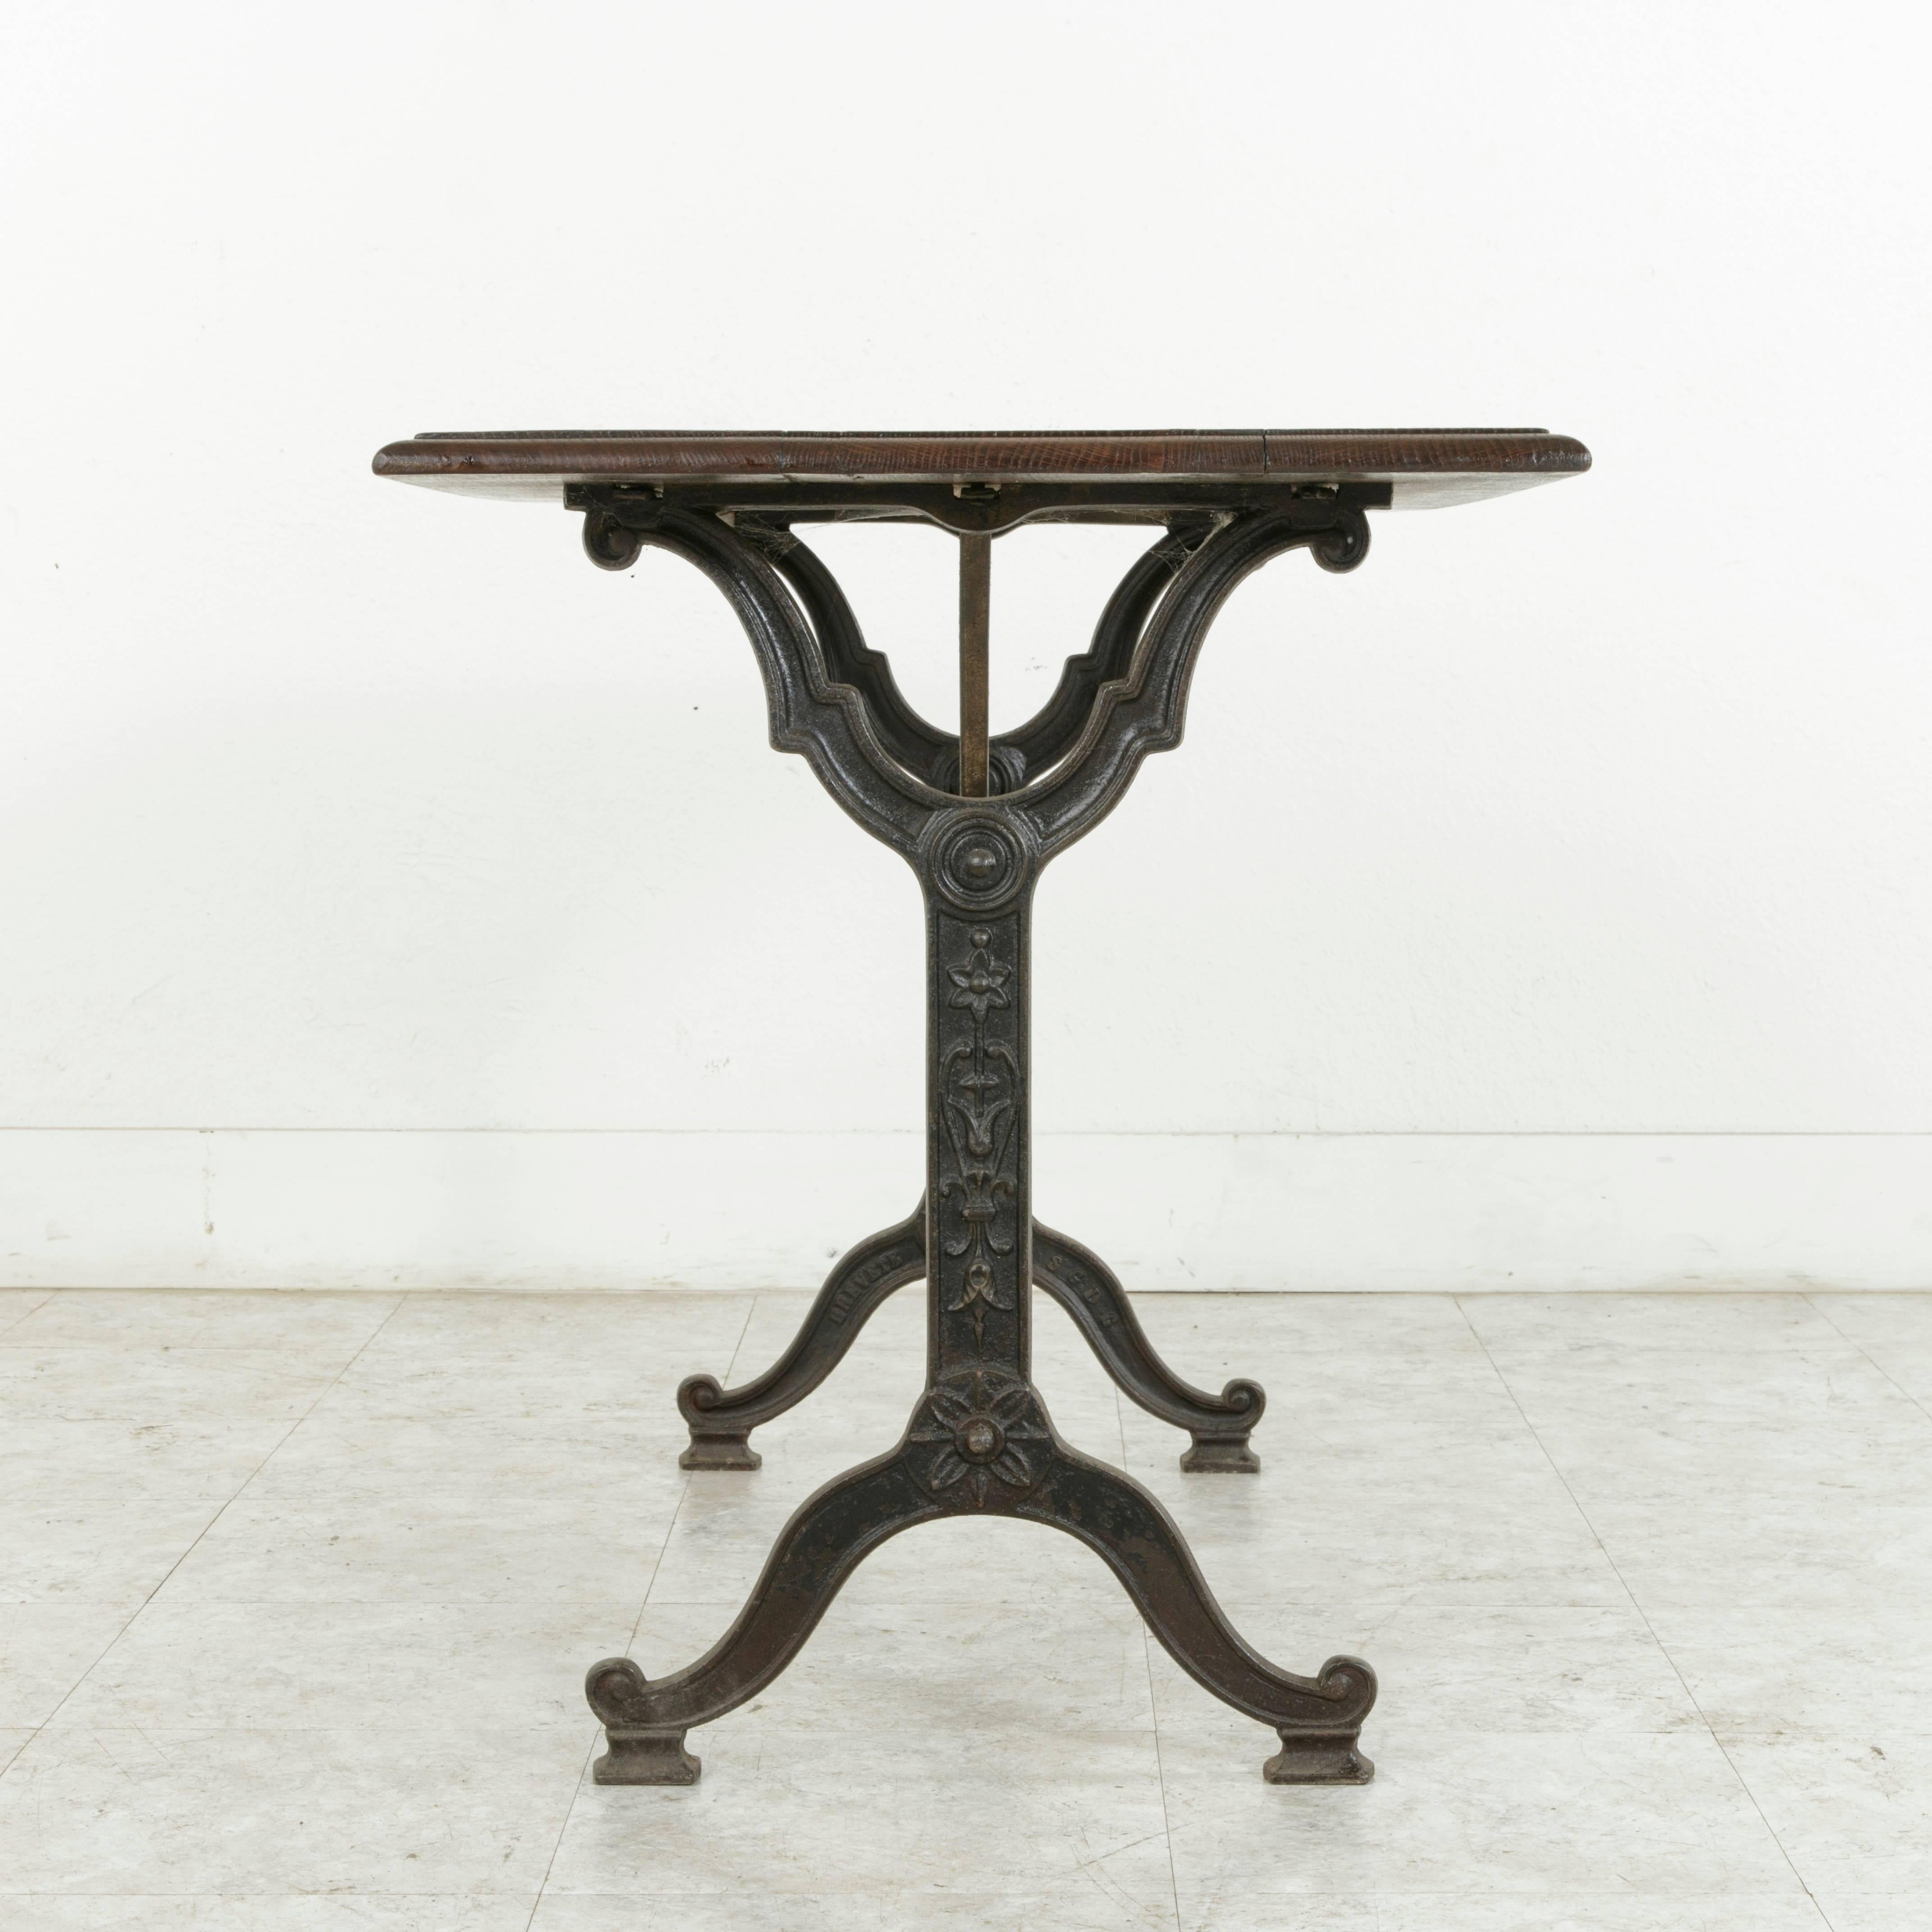 Originally used in a French brasserie around the turn of the 20th century, this Art Nouveau period bistro table or cafe table features a cast iron base and a beveled oak top constructed from three planks. The iron base of the piece is adorned with